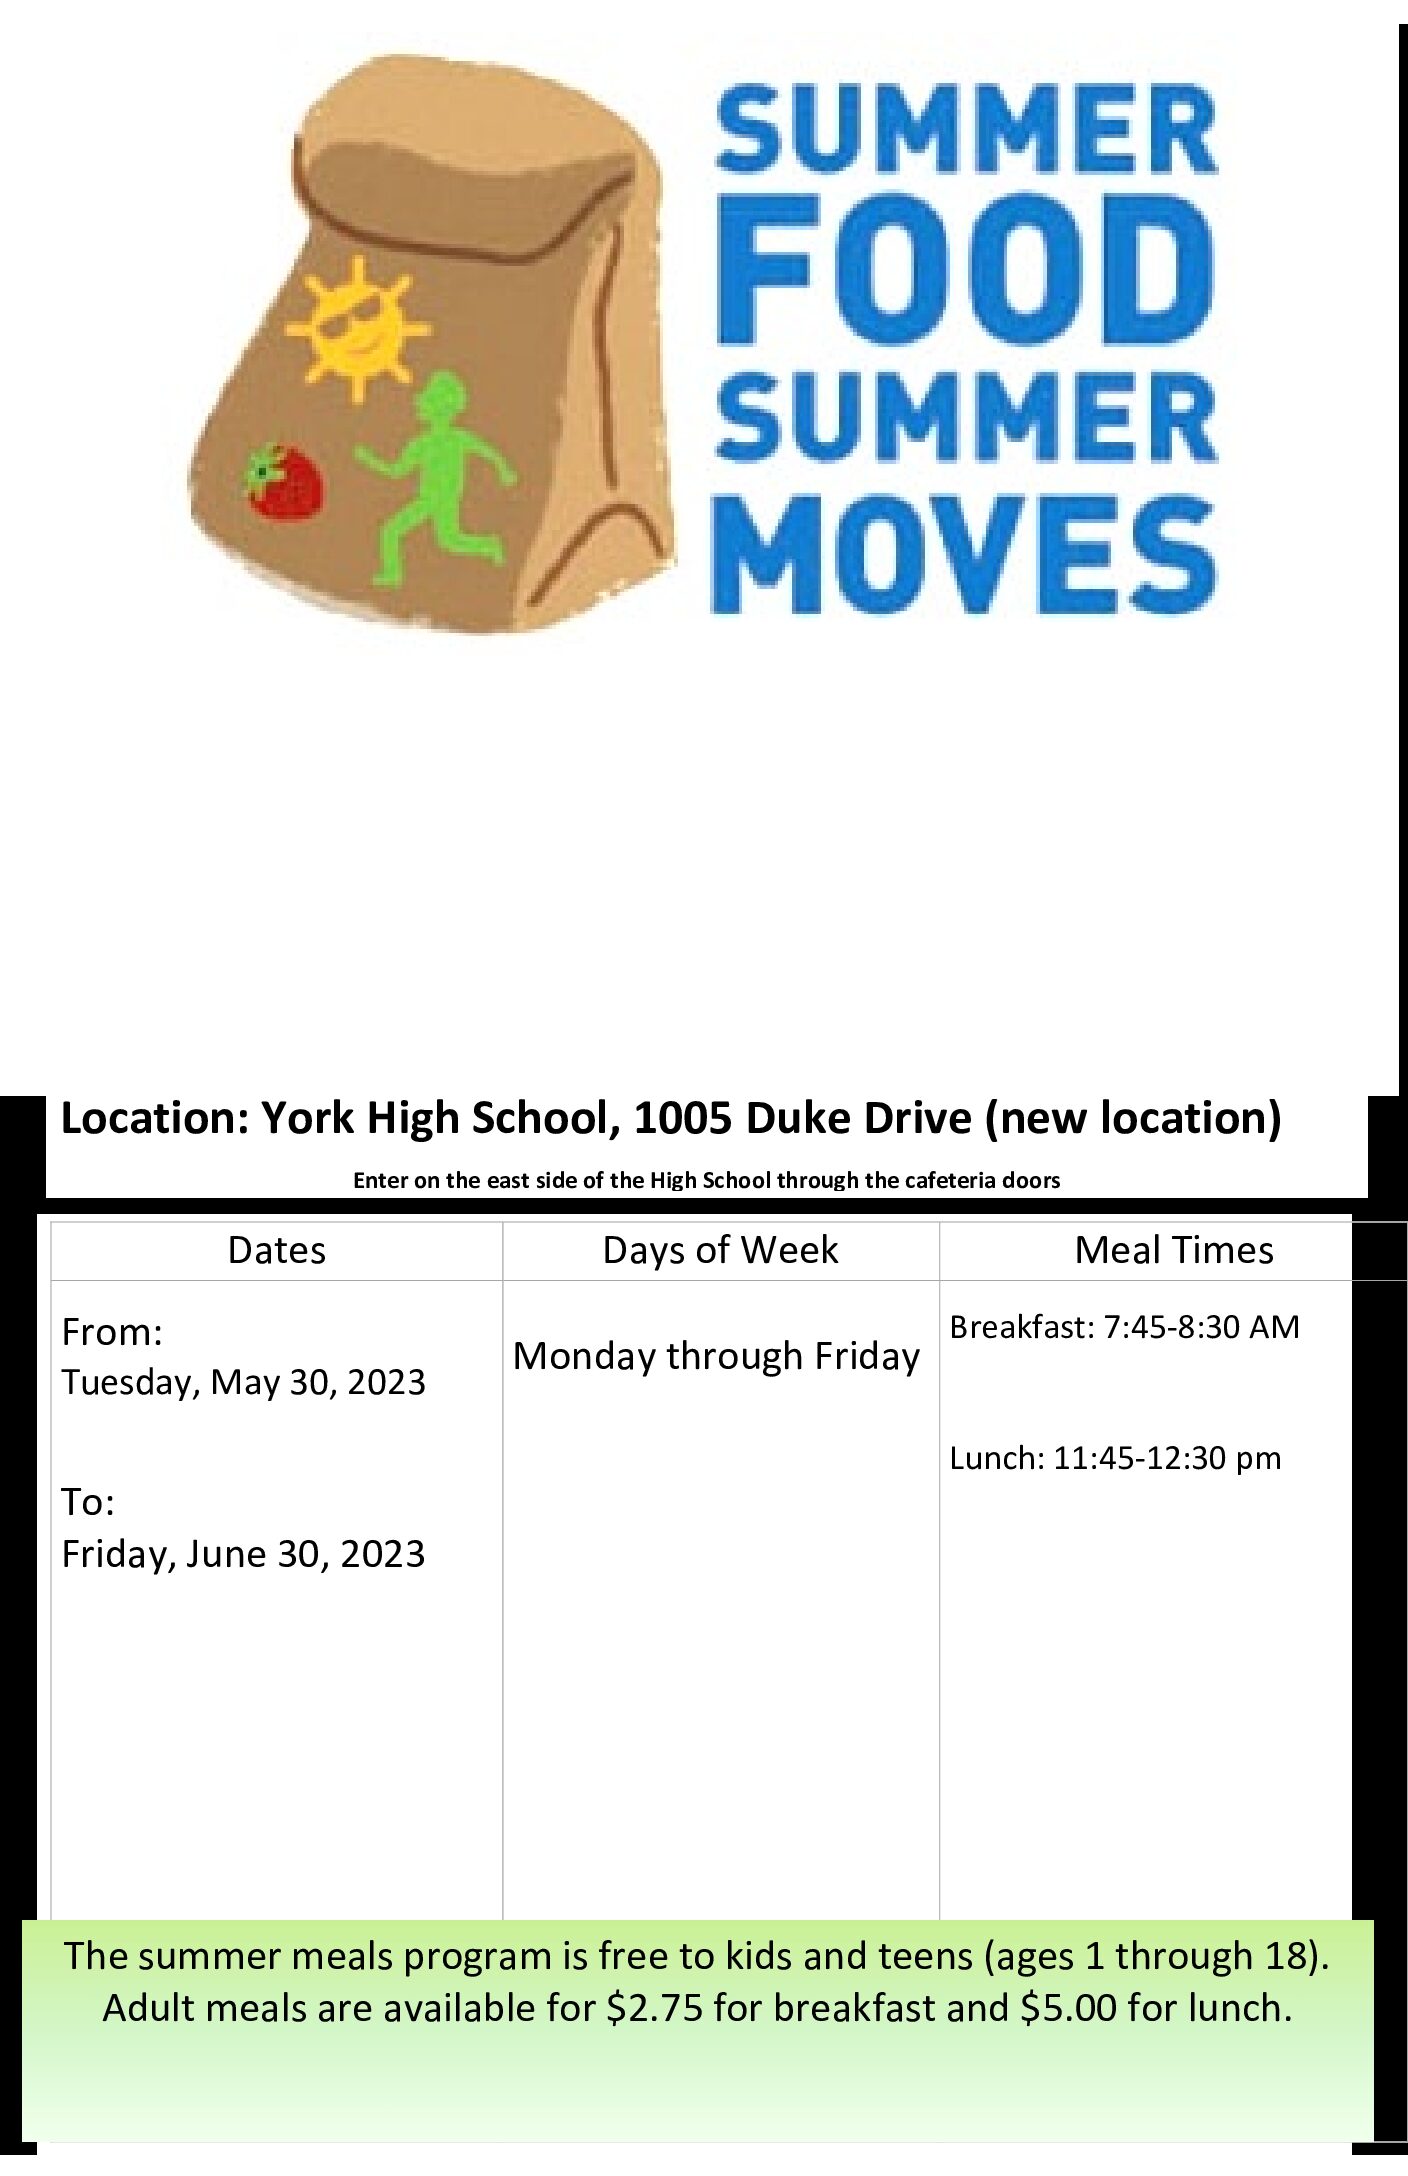 Summer Food Service Program located at York High School this year!